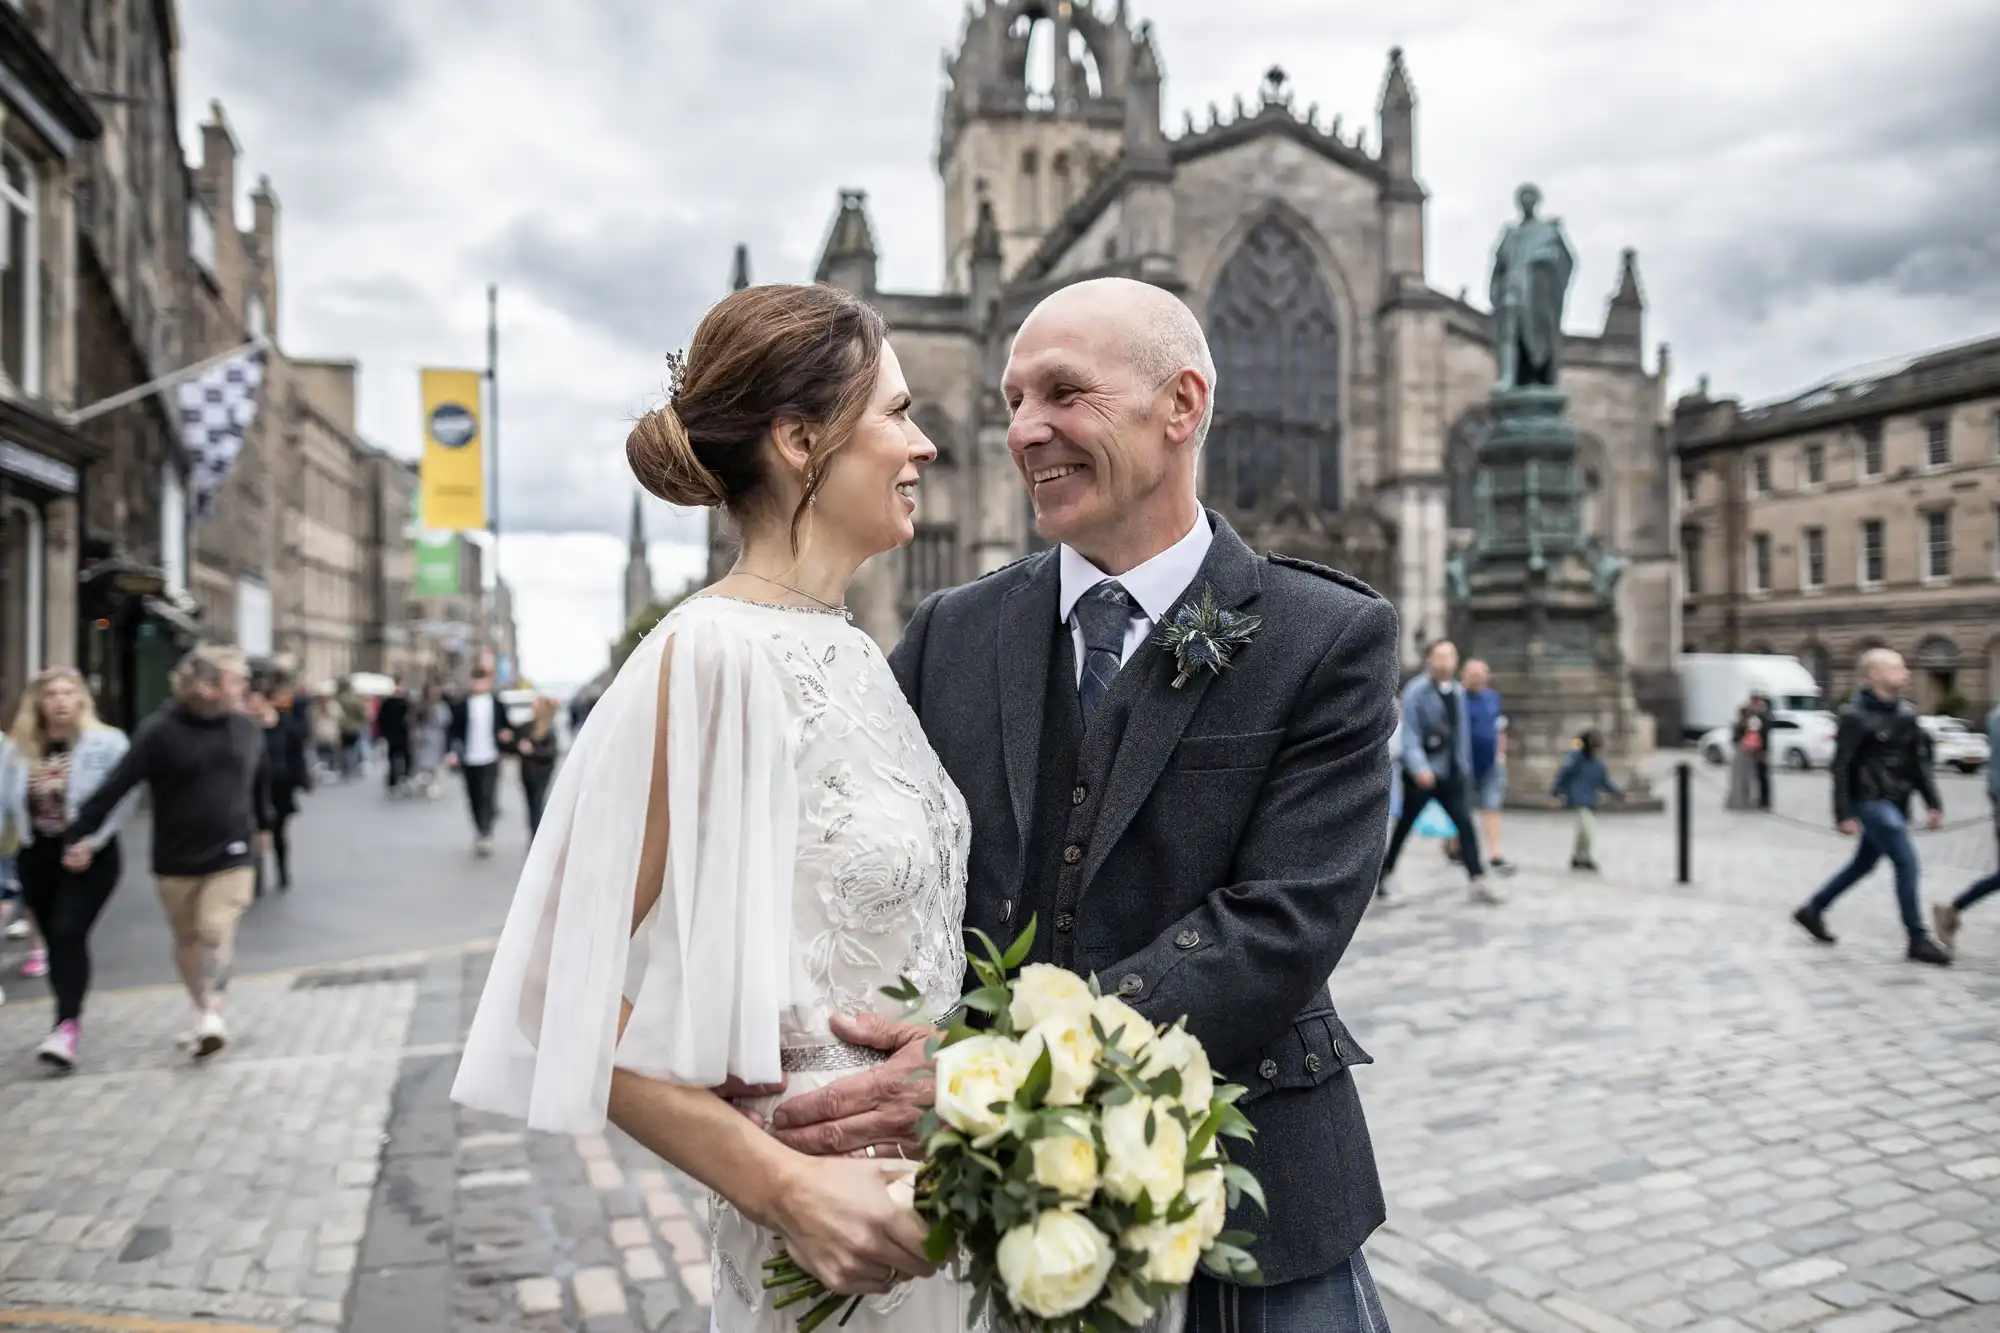 A smiling couple in wedding attire stands closely together holding a bouquet on a cobblestone street, with a historic church and people in the background.